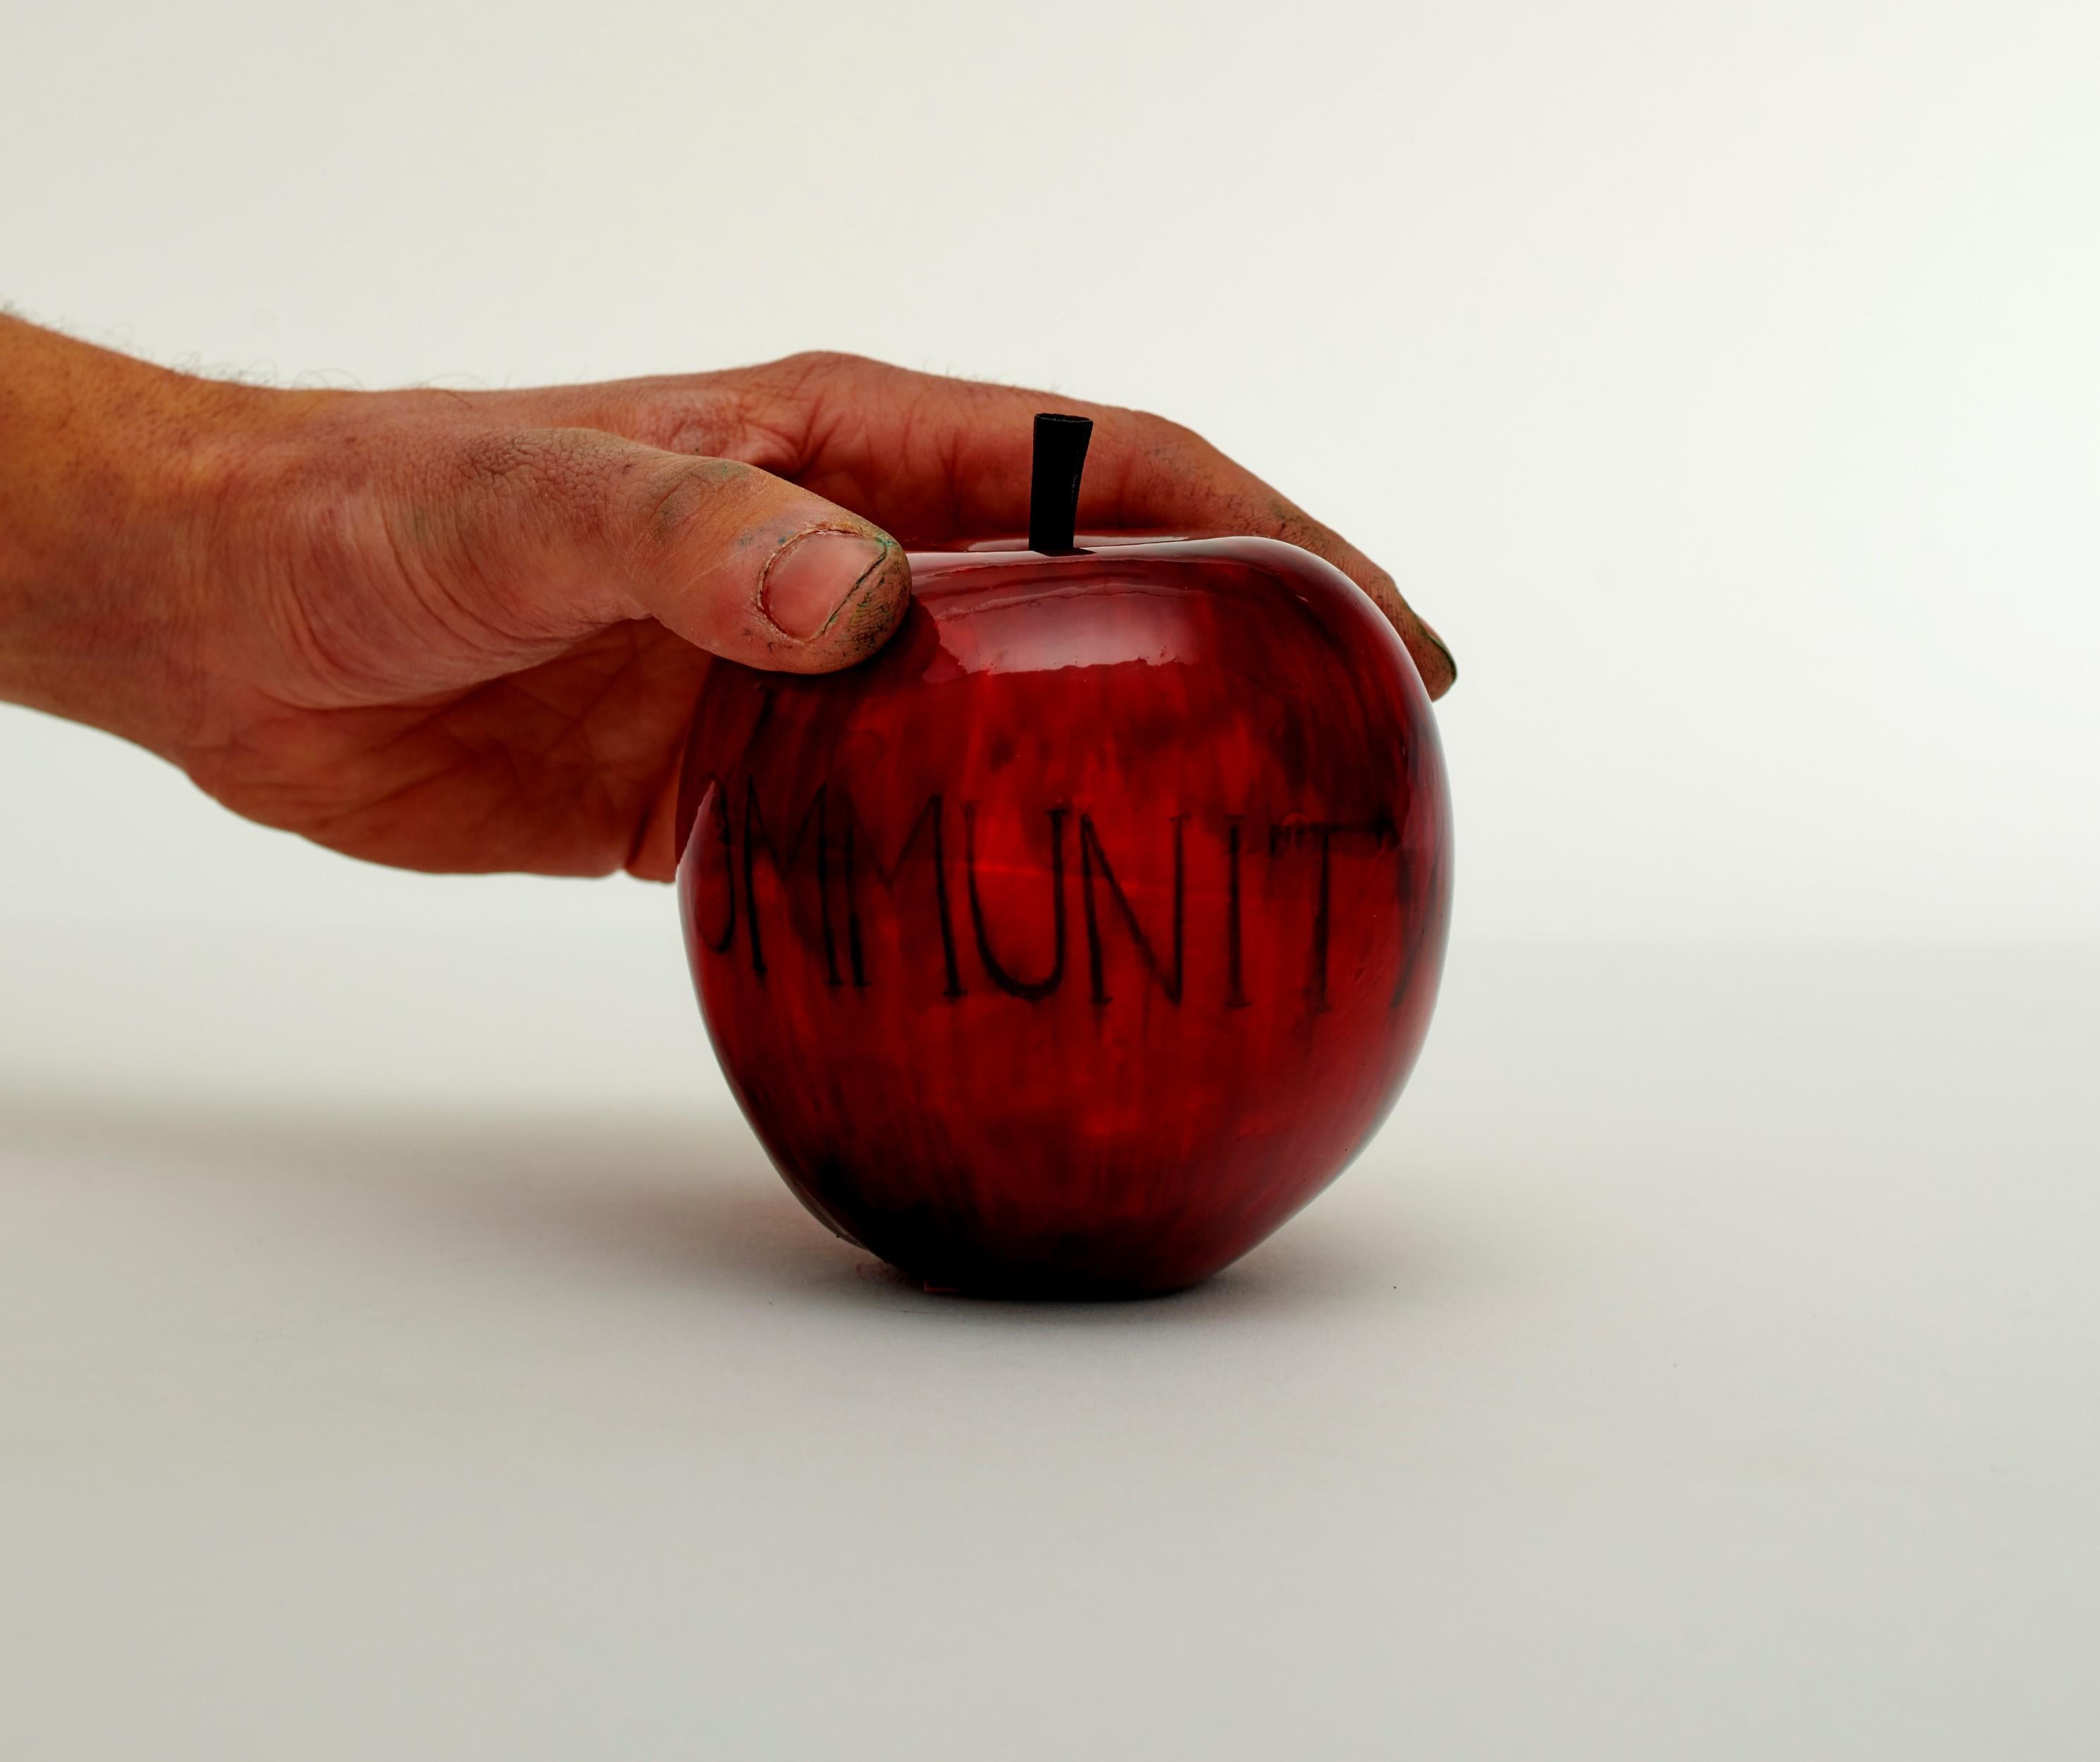 Community (Apple) - Gray Figurative Sculpture by Barnaby Barford